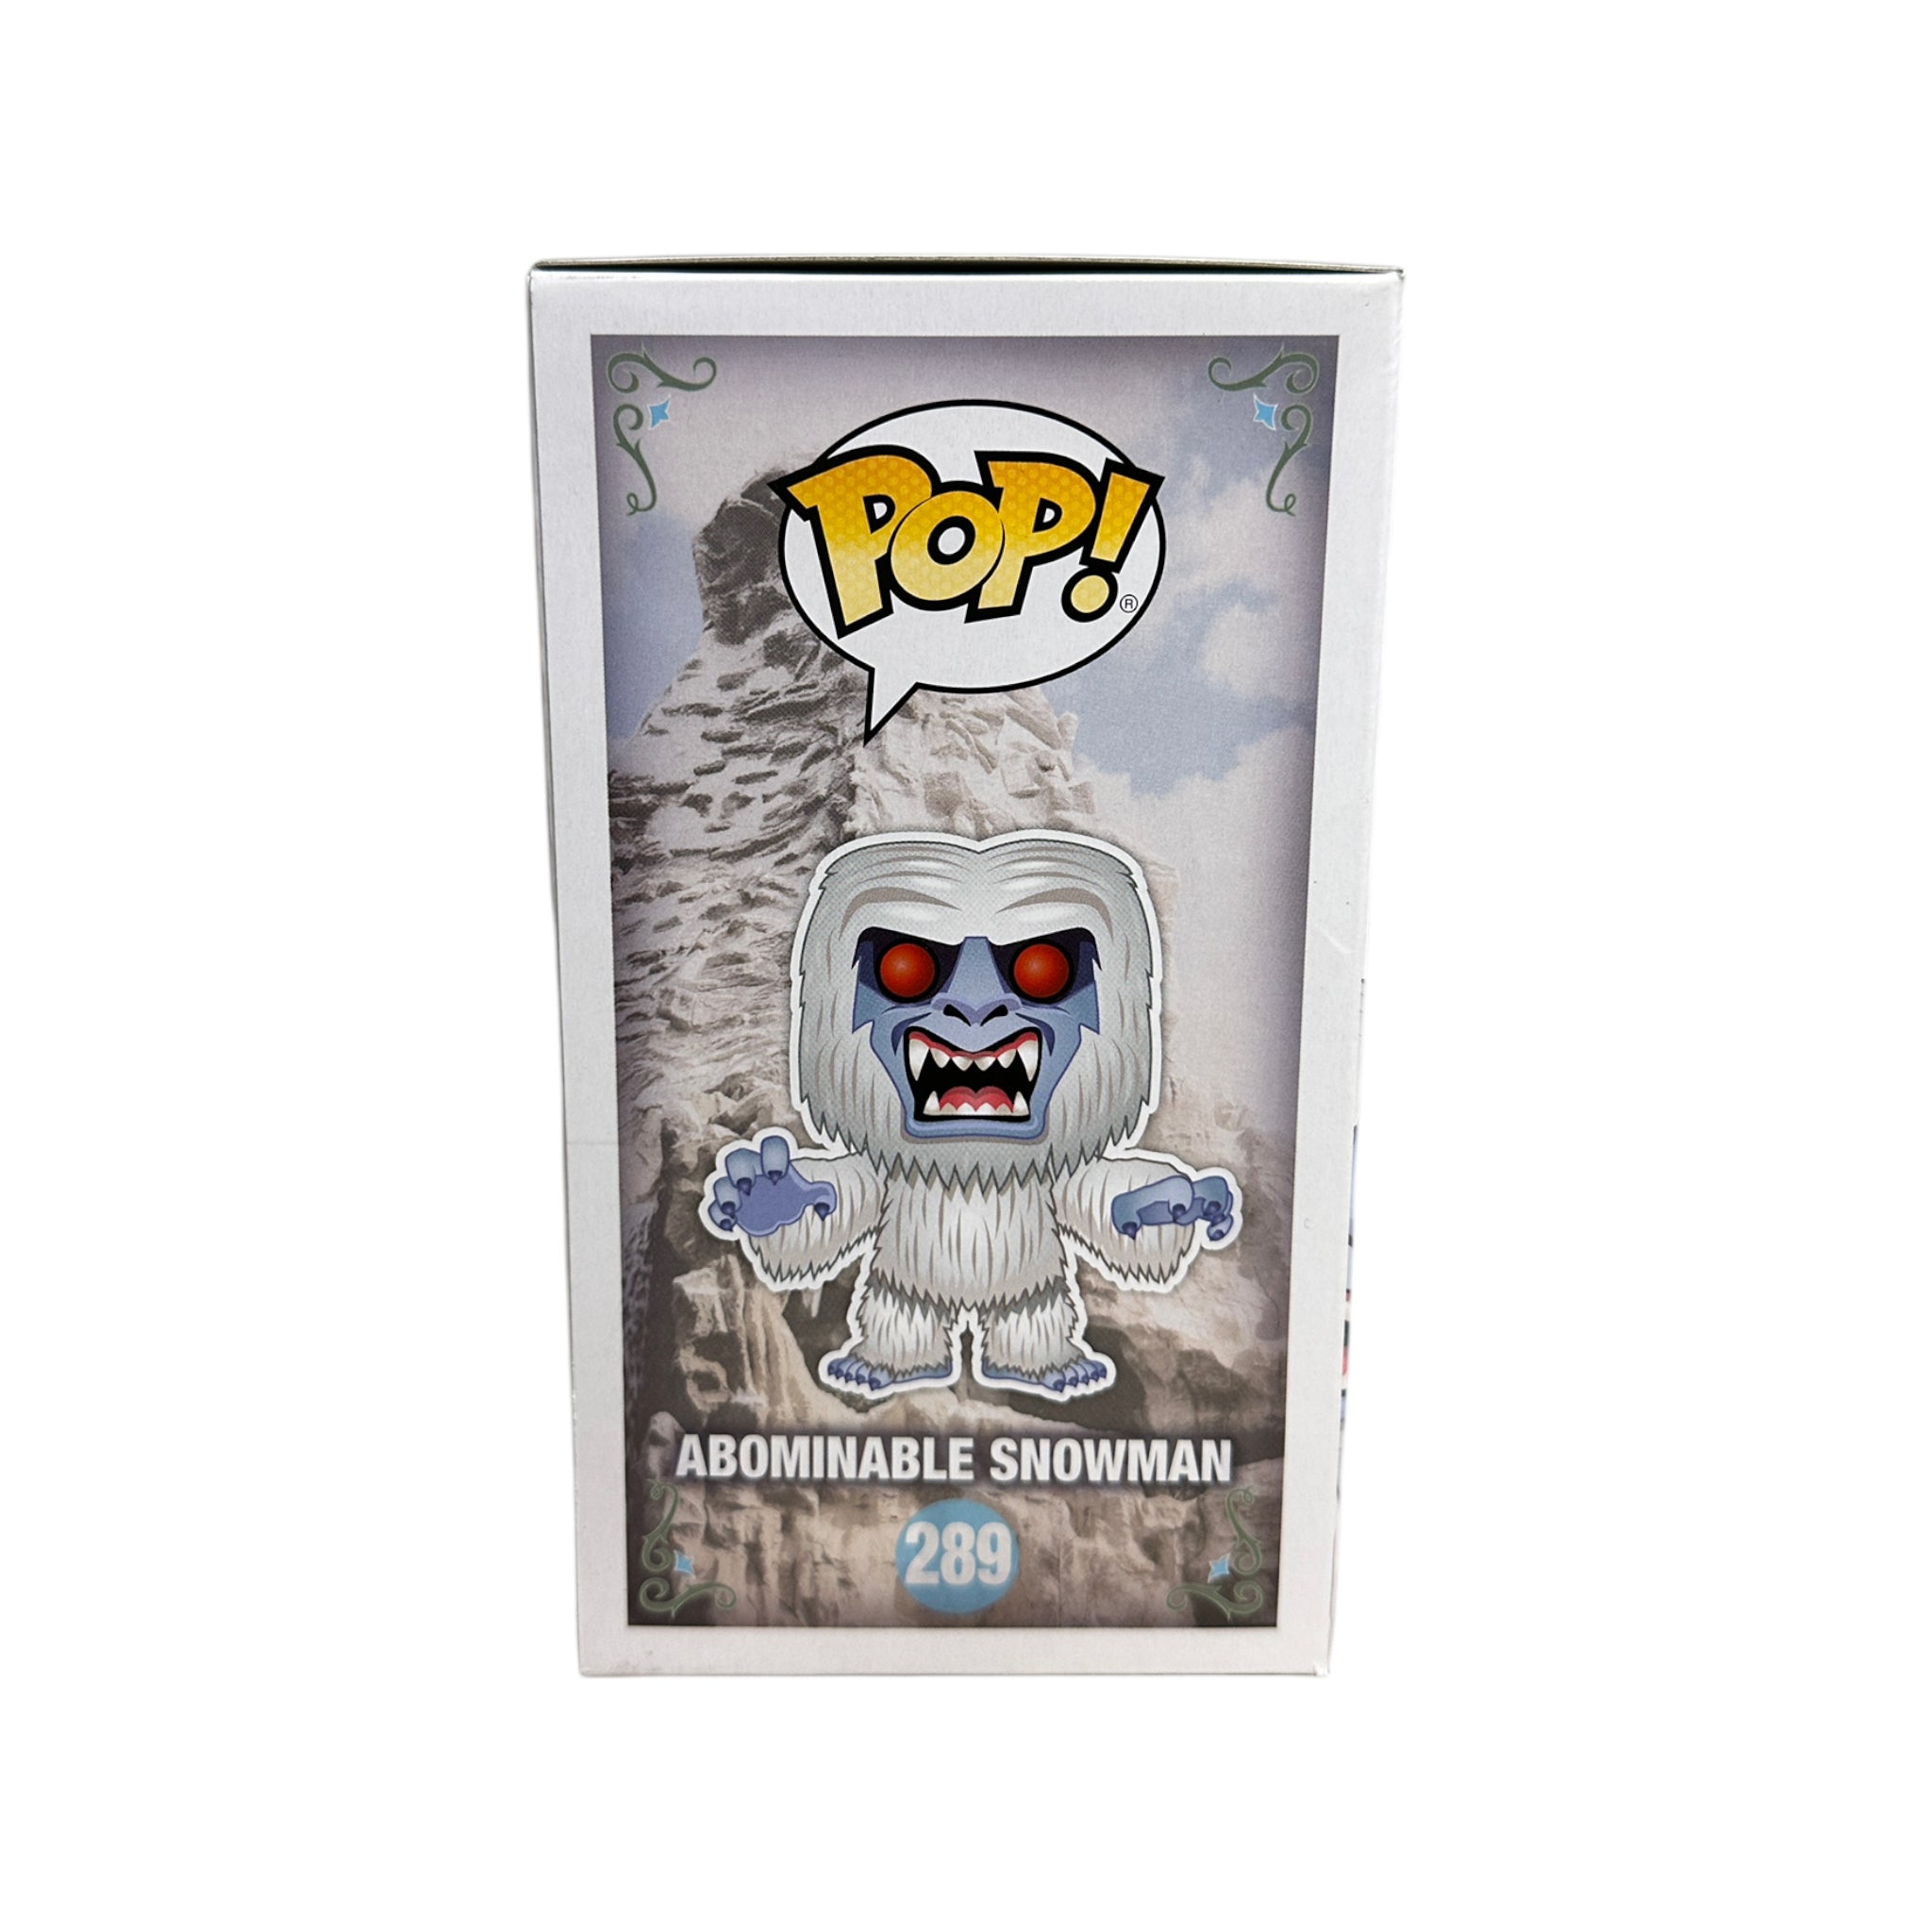 Abominable Snowman #289 (Flocked) Funko Pop! - Matterhorn Bobsleds - NYCC 2017 Exclusive LE1000 Pcs - Condition 7/10